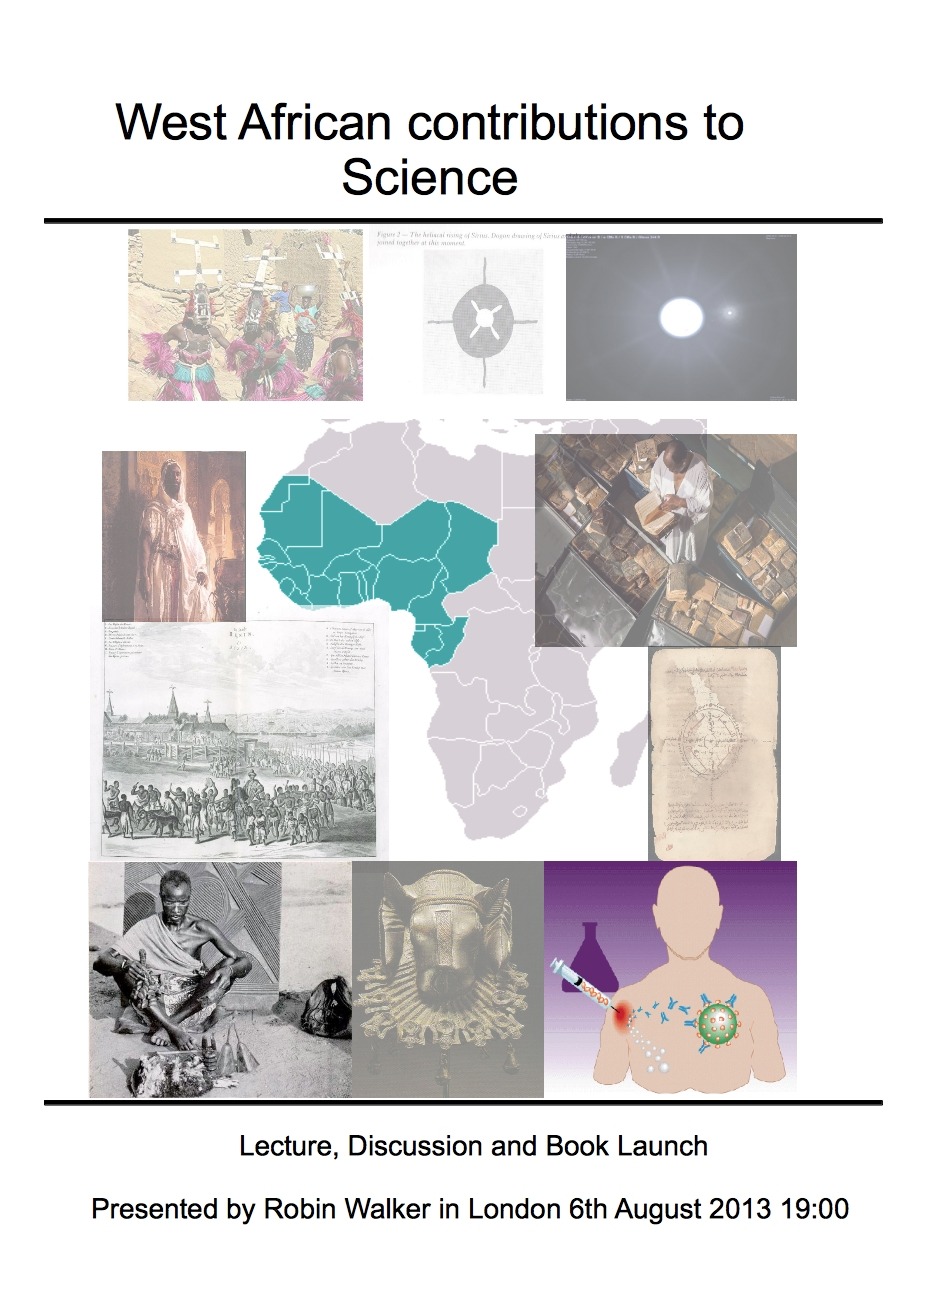 diasporicroots:  “Ancient West African contributions to Science and Technology